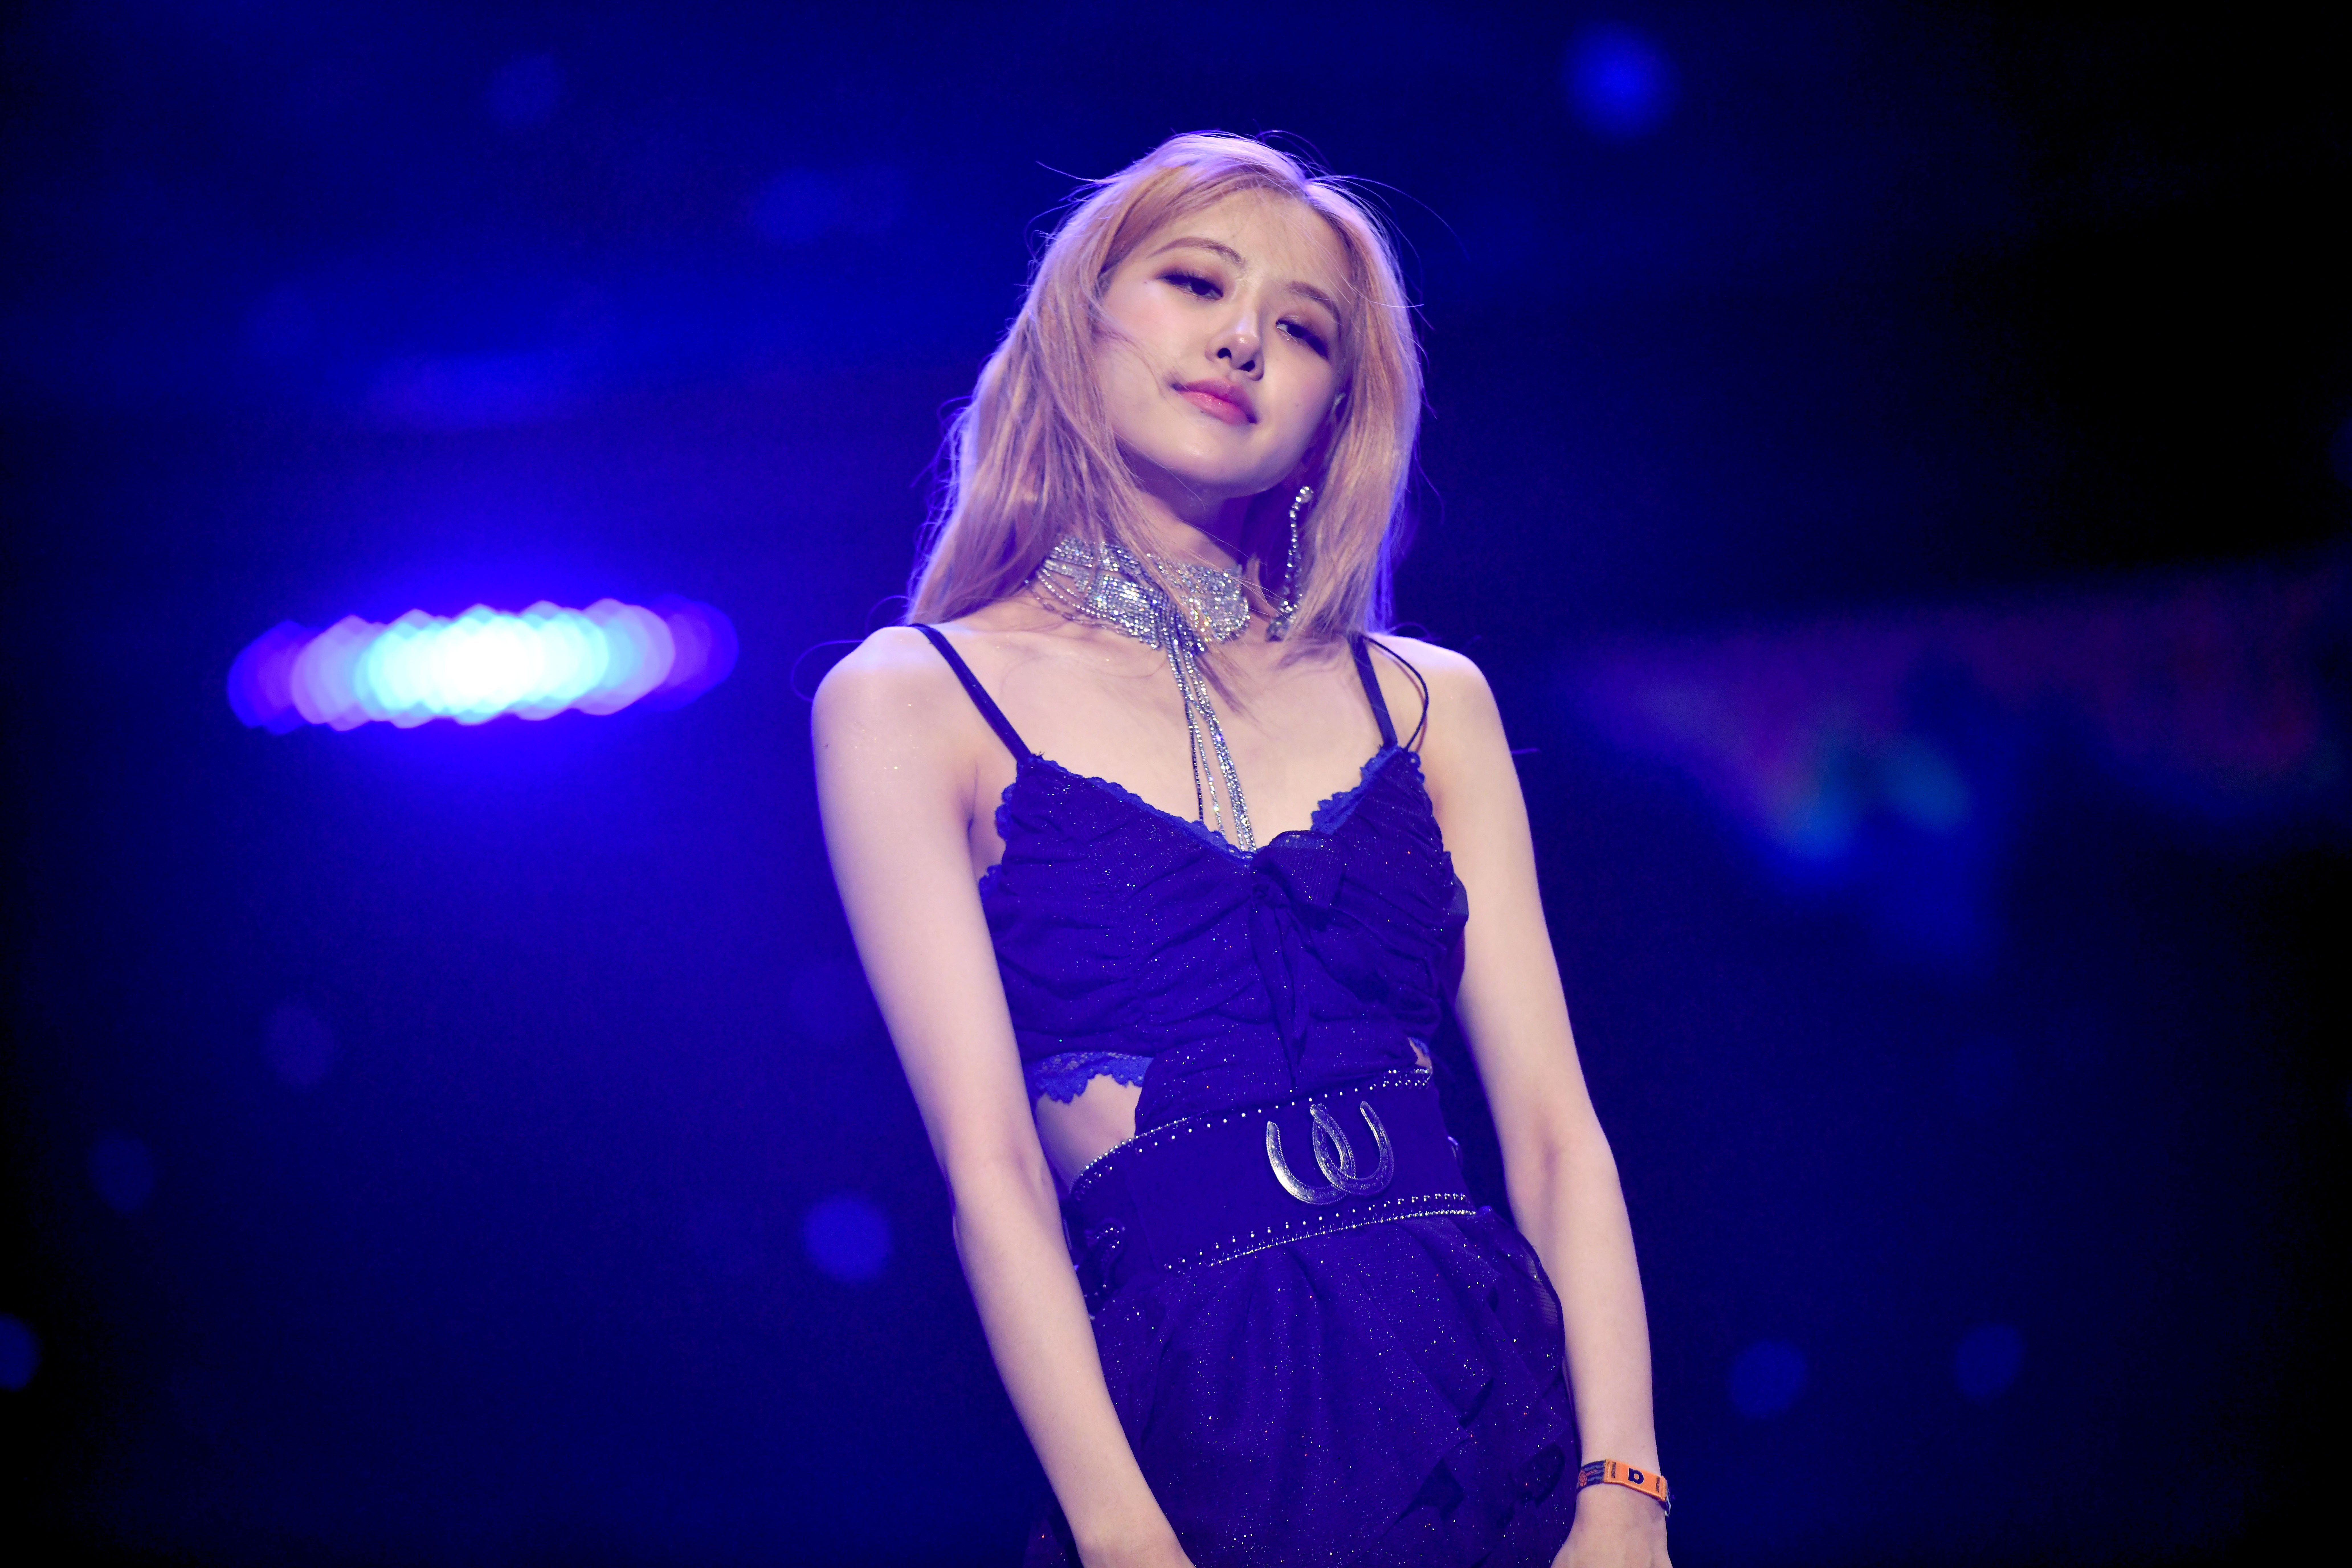 Singer Rosé of BLACKPINK performs on stage during the 2019 Coachella Valley Music and Arts Festival